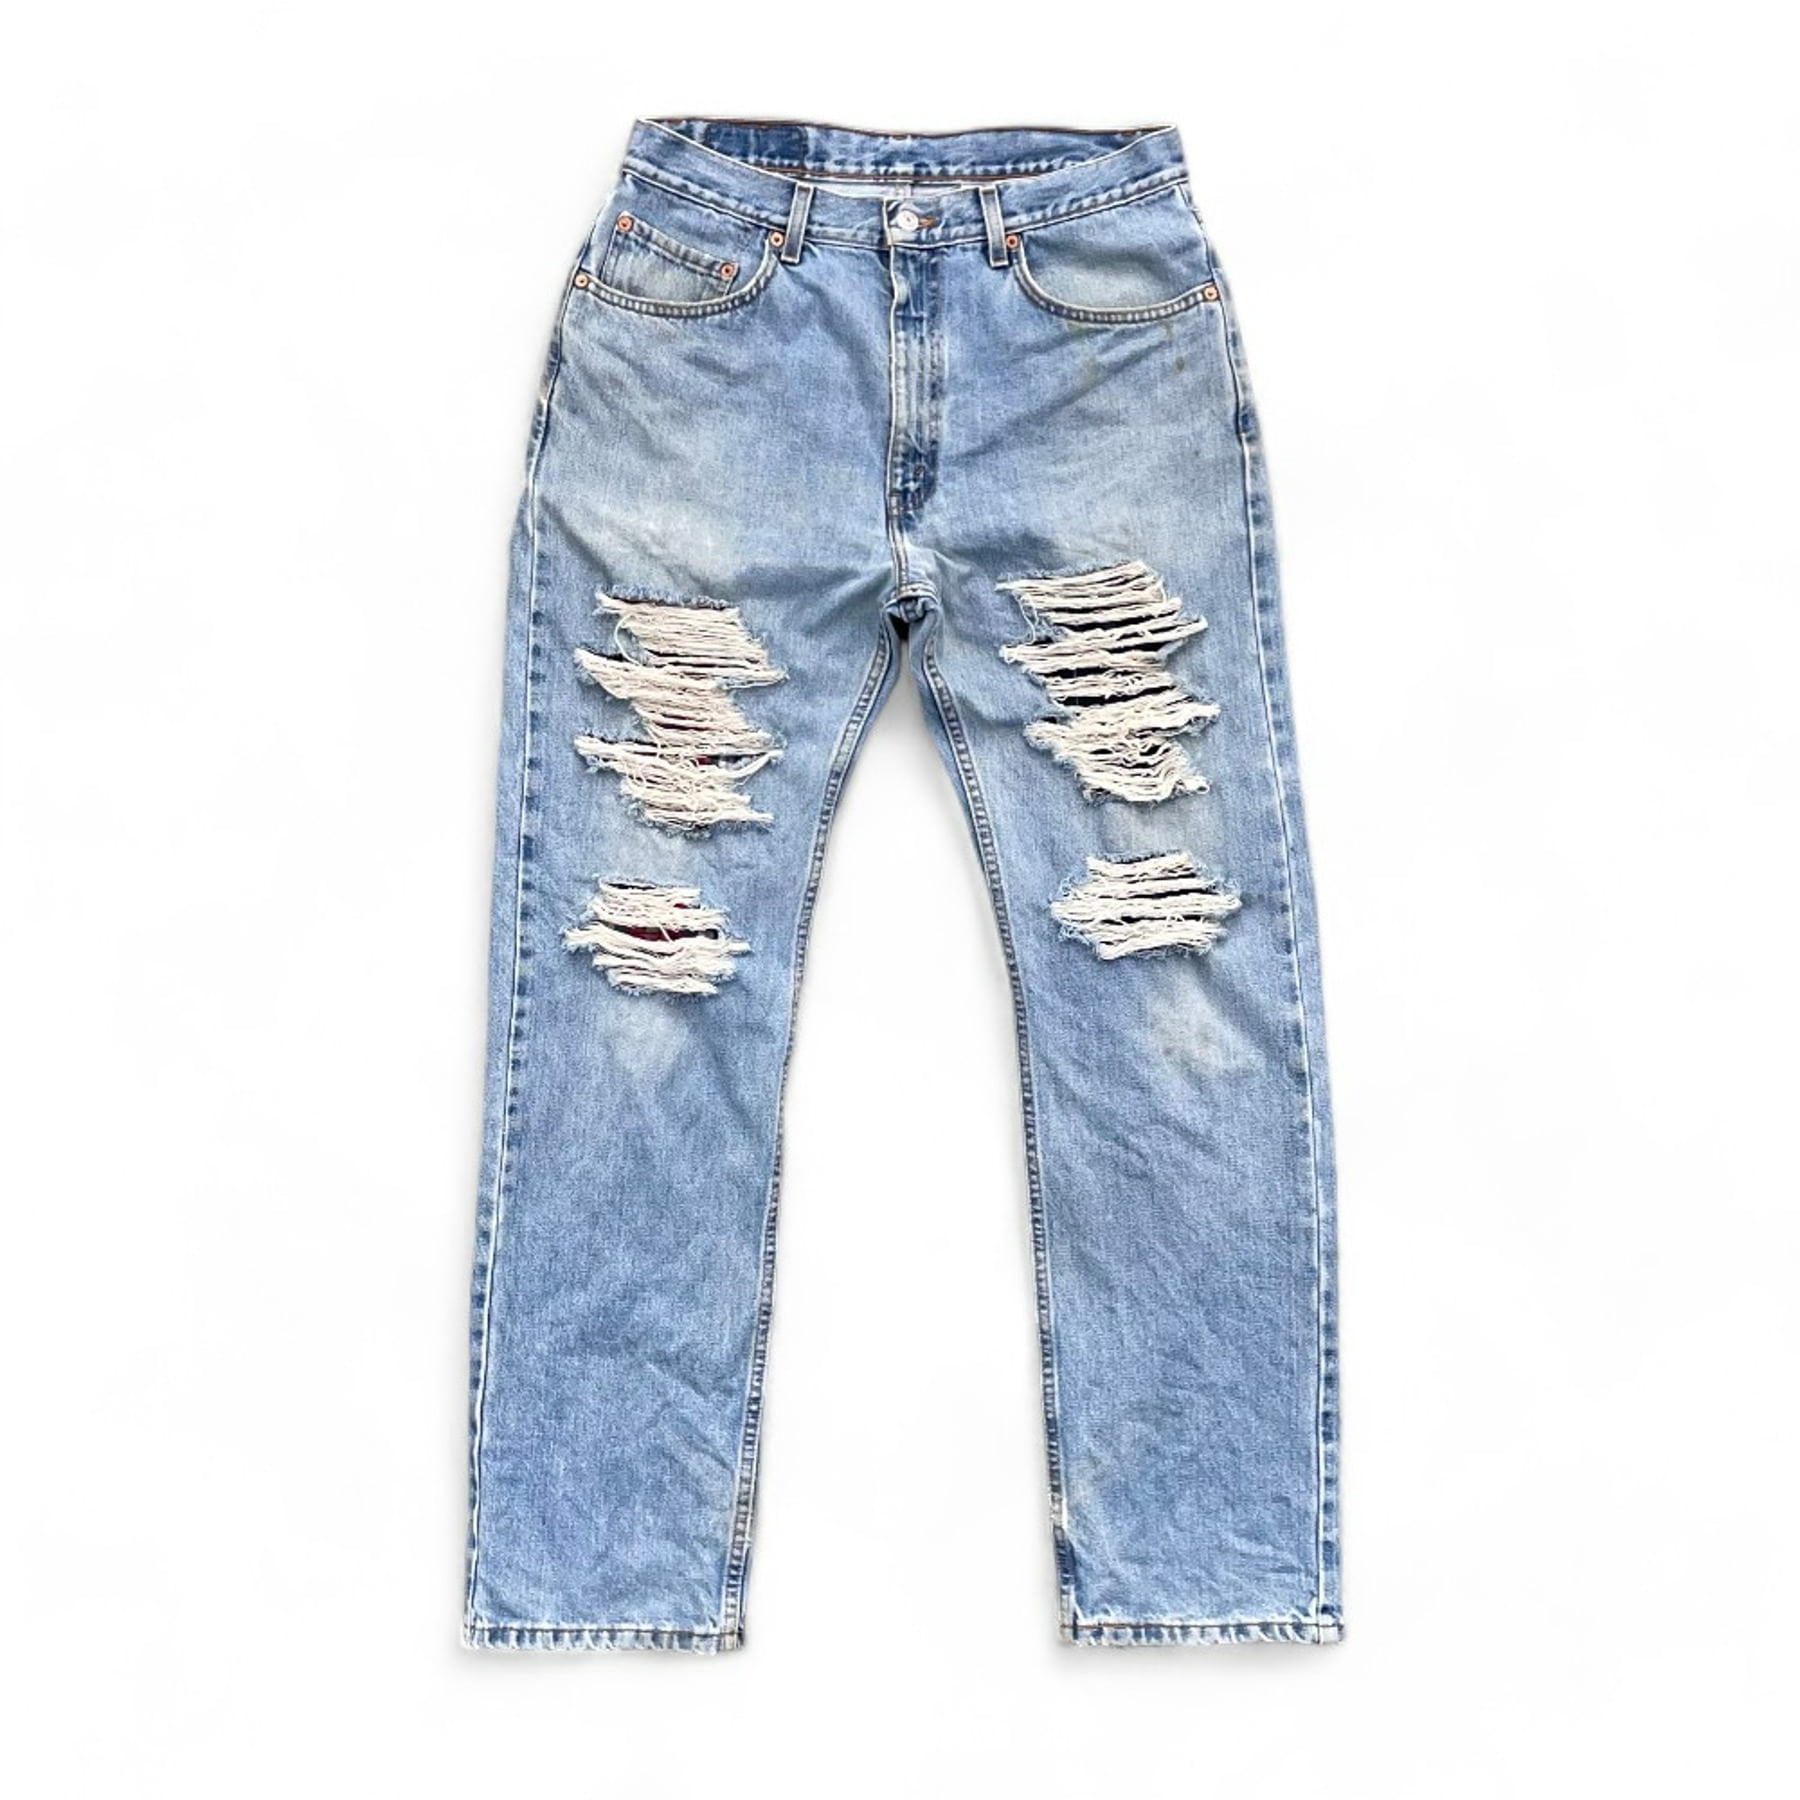 2000 Levis 505 Customized Jean - 33inch